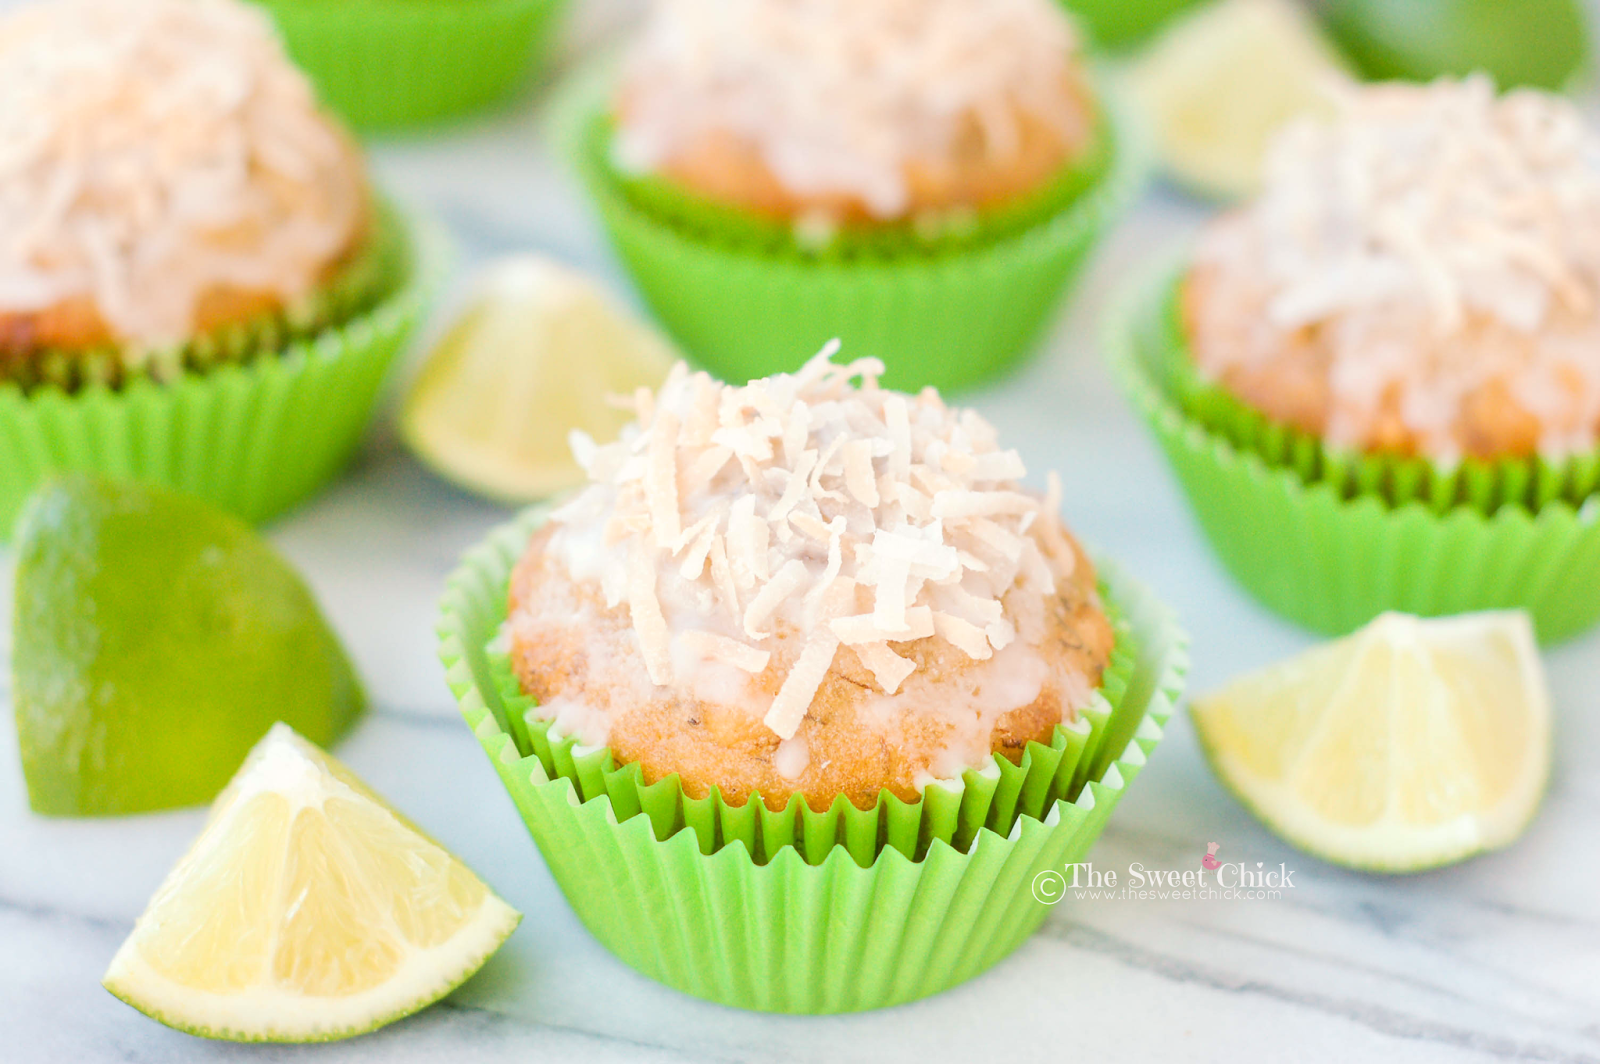 Coconut Banana Muffins w/Tequila Lime Glaze by The Sweet Chick